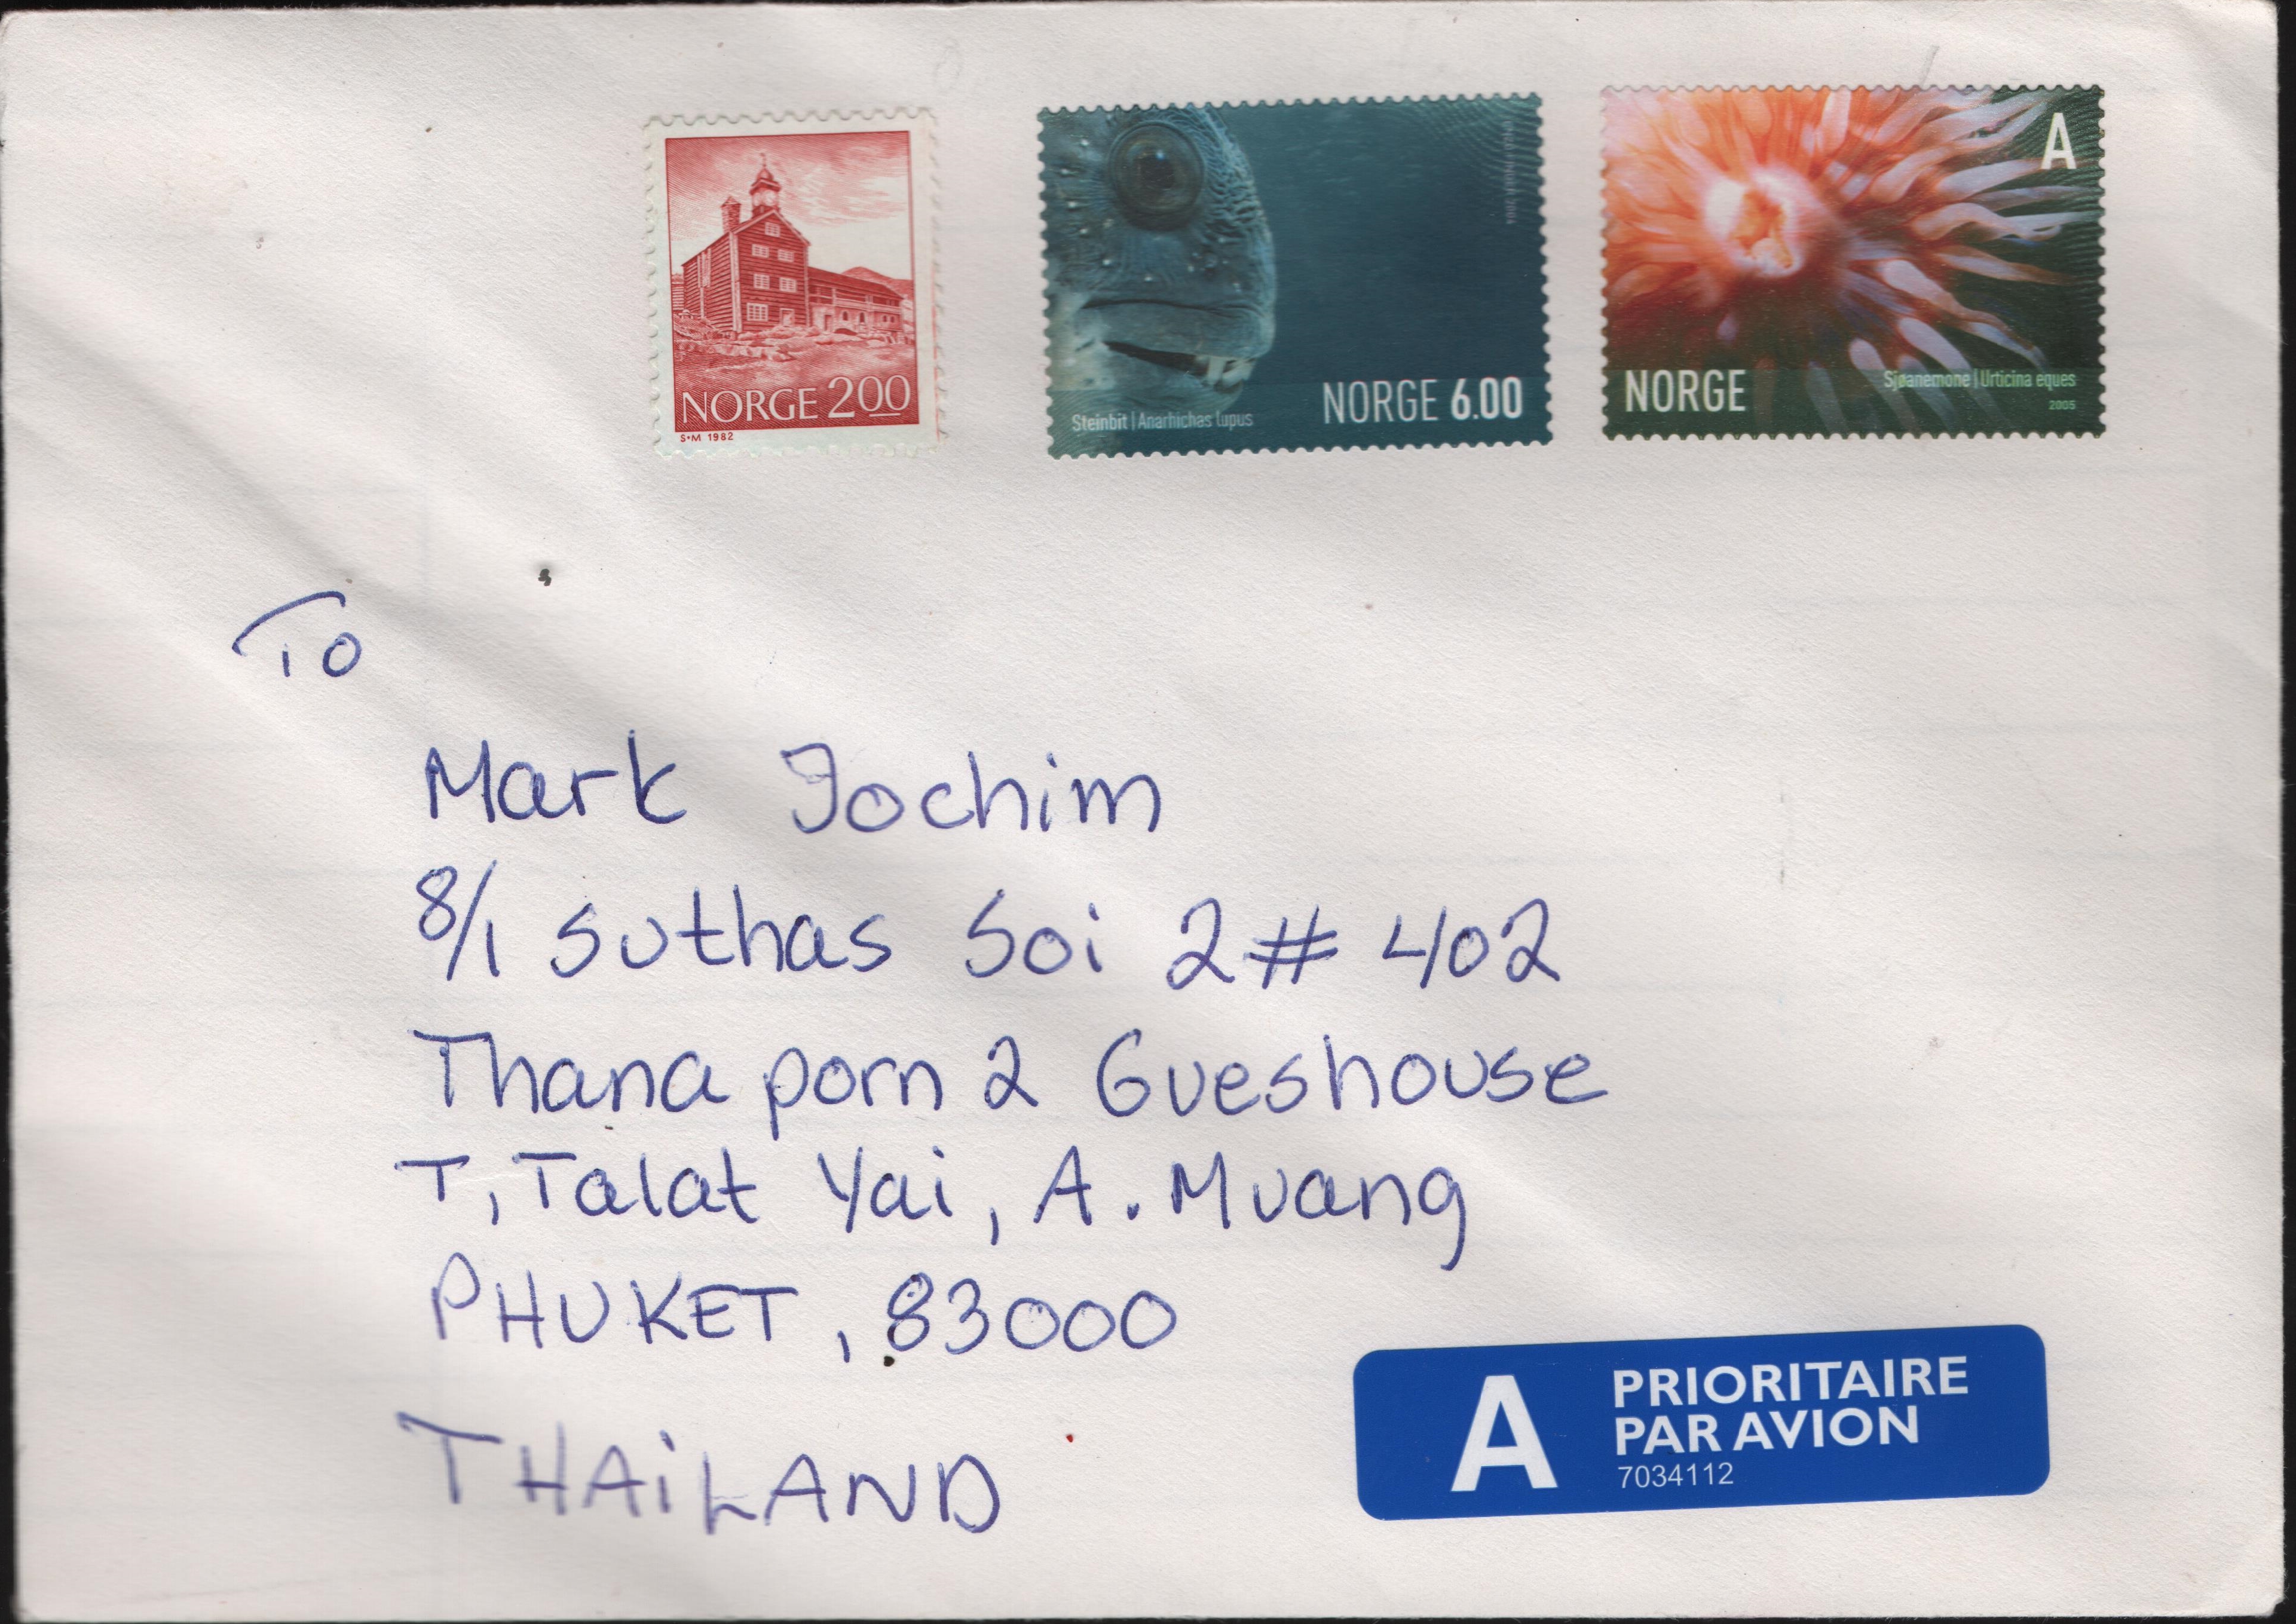 Cover received in Thailand in July 2018 bearing copies of Norway Scott #719 (1982), #1390 (2004) and #1441 (2005). Unfortunately, the cover didn't receive a single postal marking.